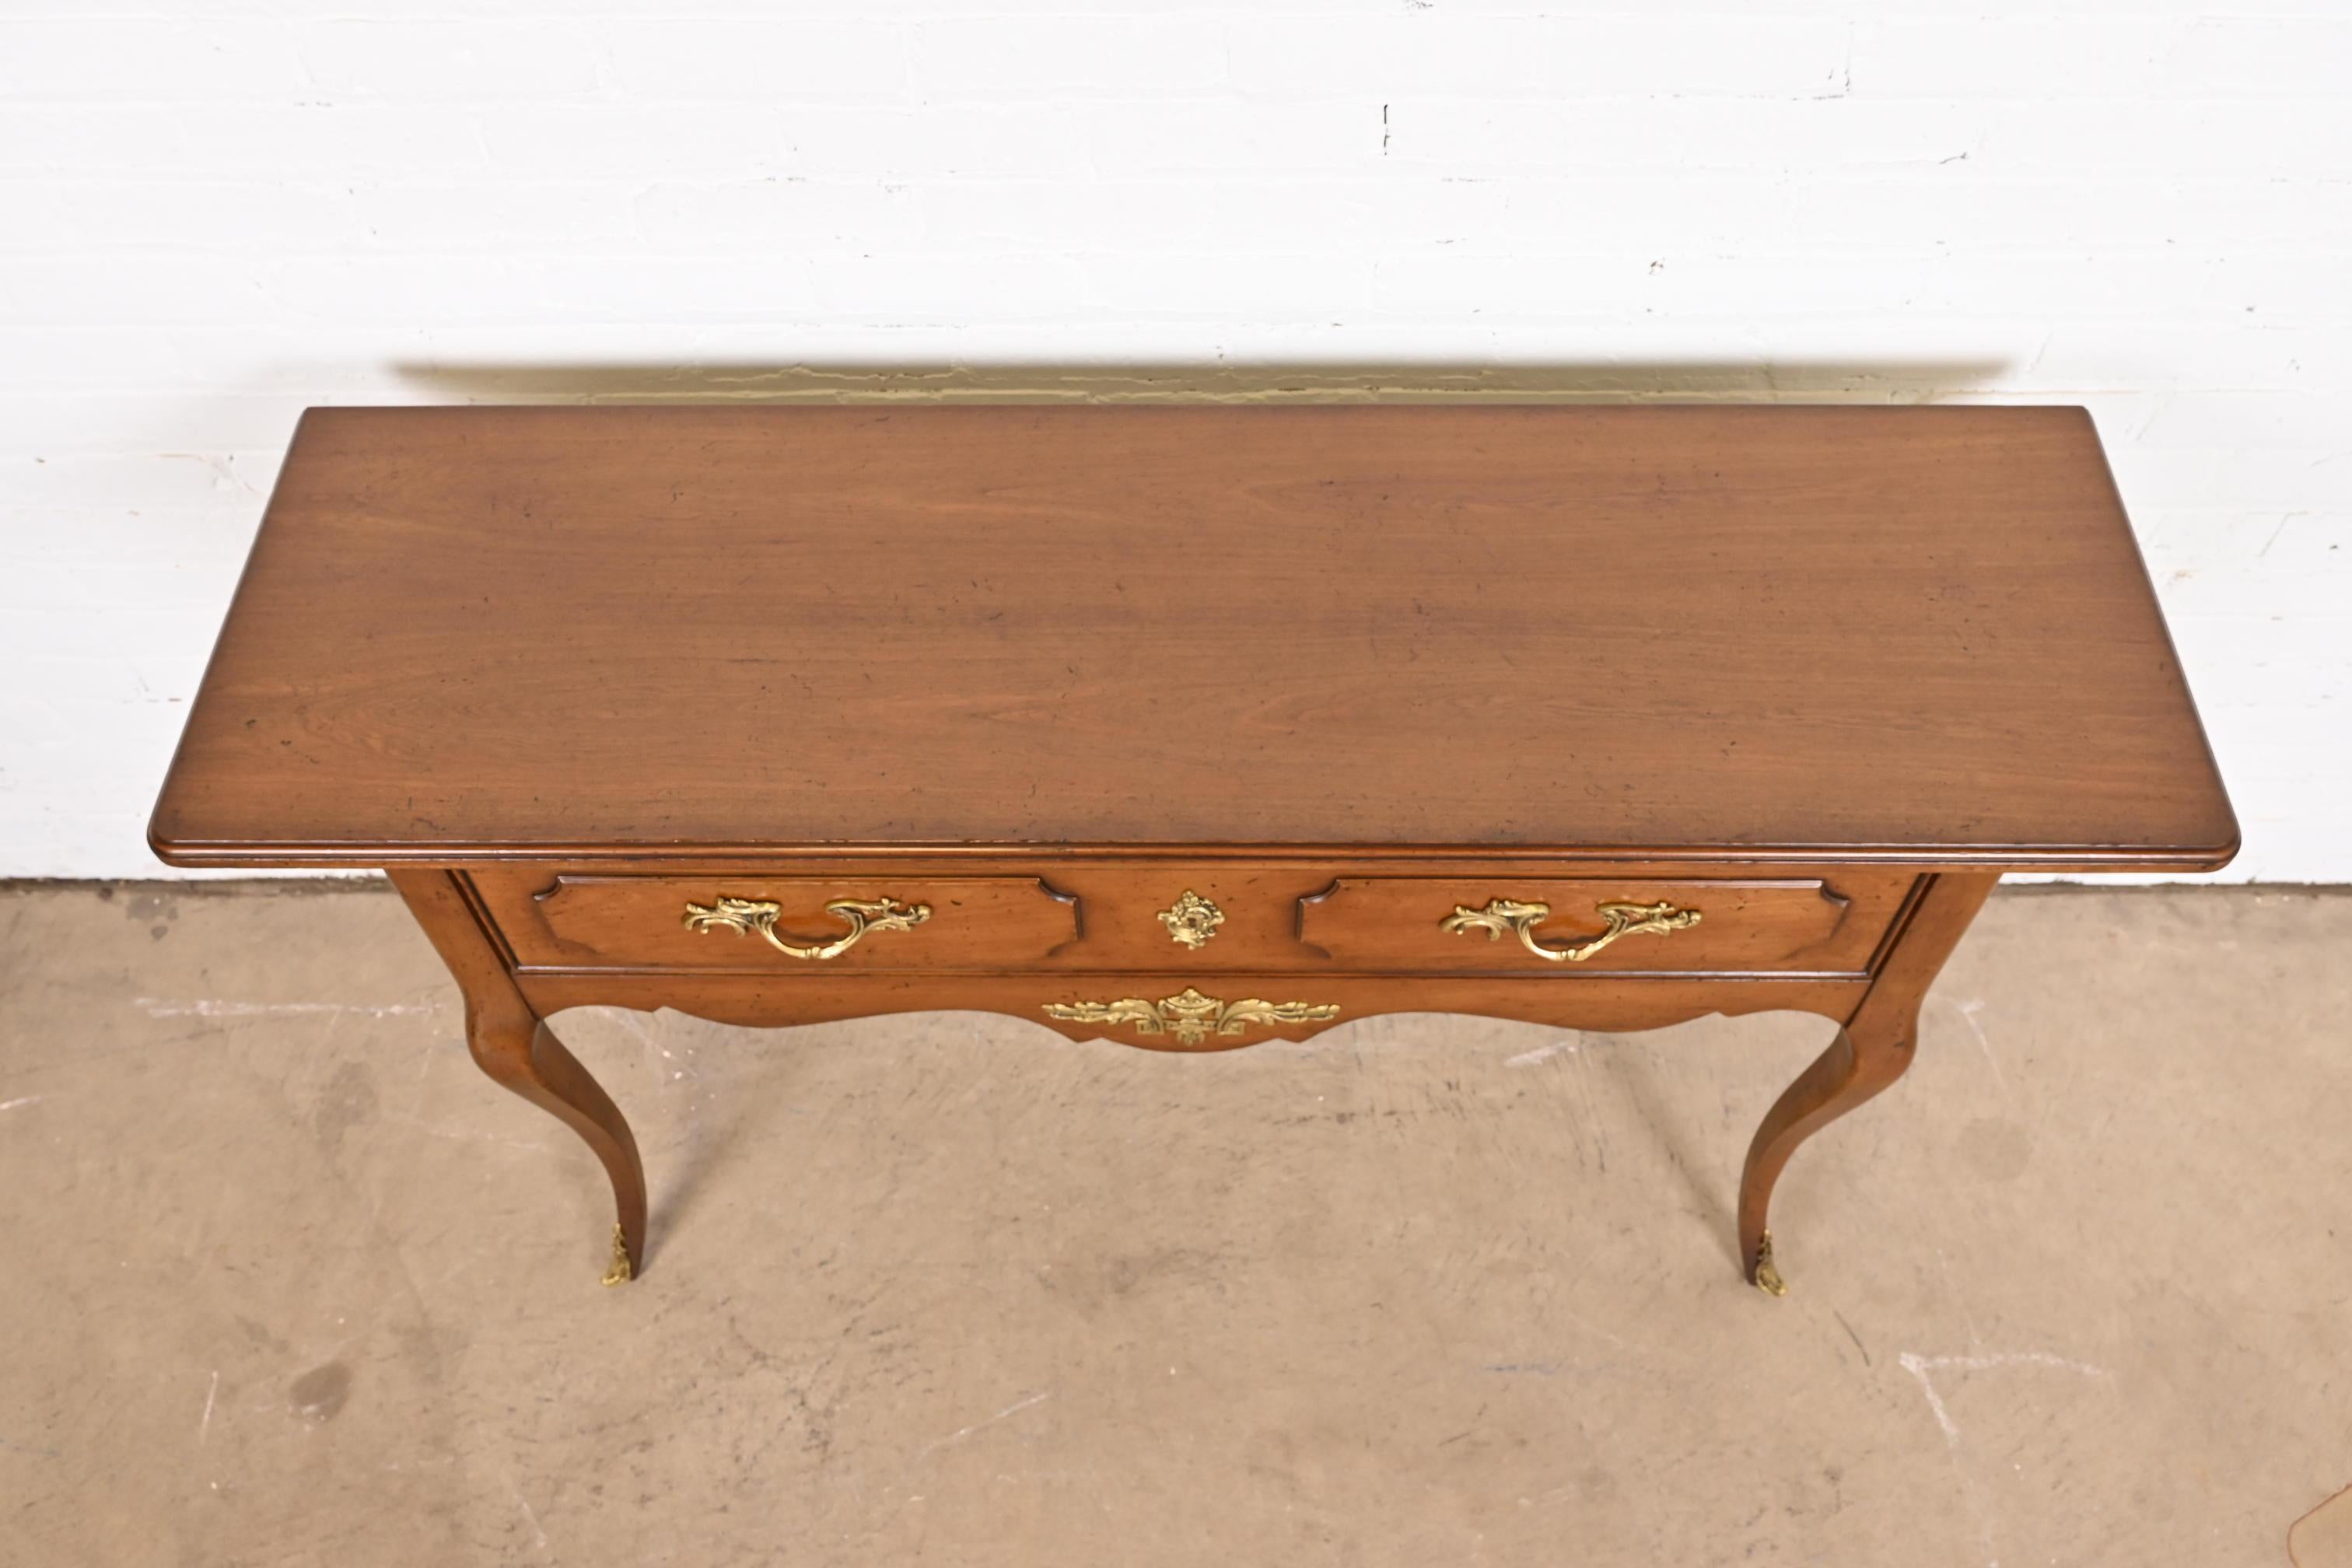 Bodart French Provincial Louis XV Fruitwood Console Table With Mounted Ormolu For Sale 4